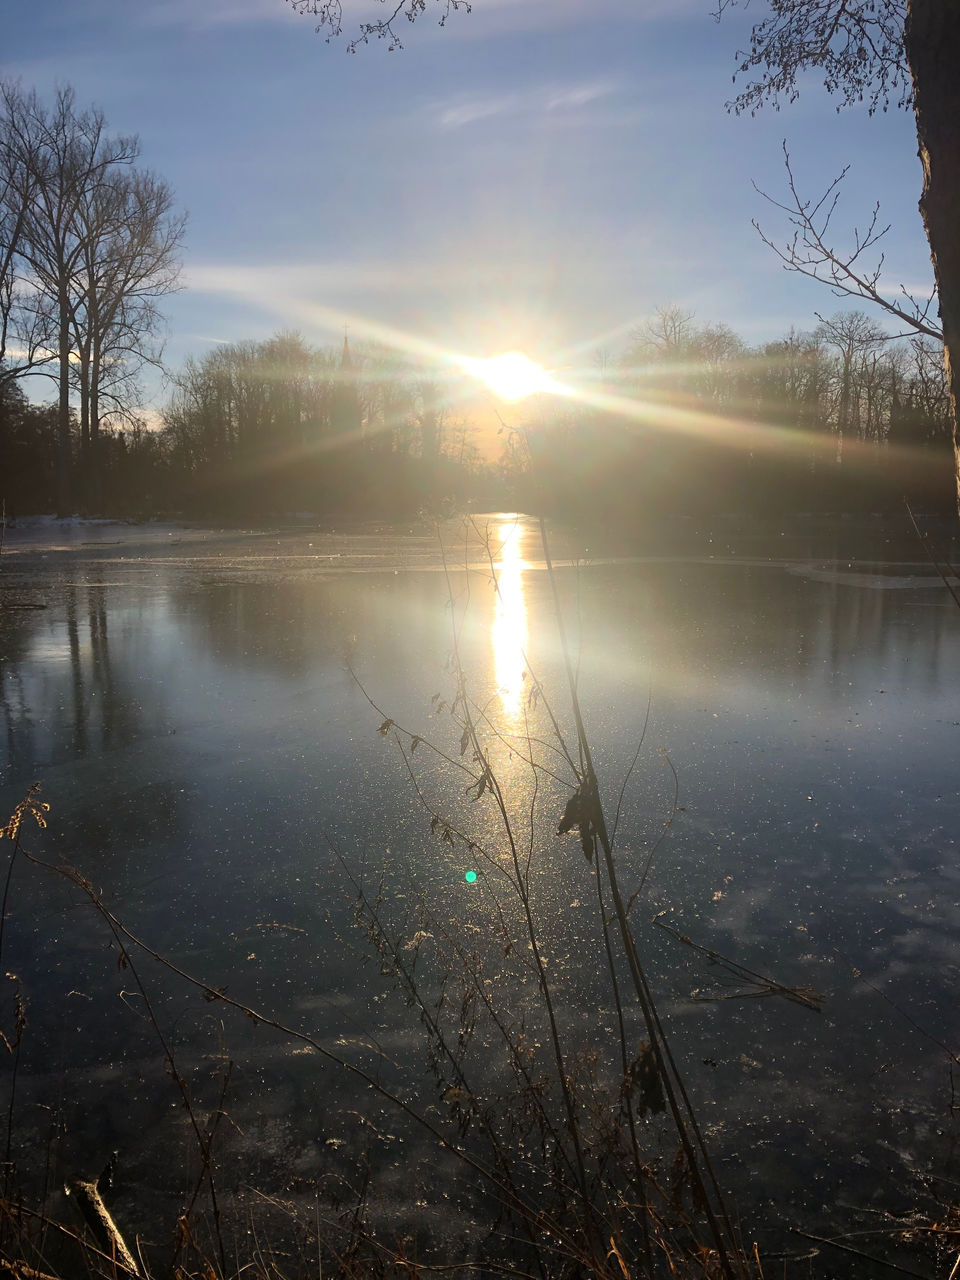 reflection, morning, water, tree, sky, nature, sunlight, plant, lake, tranquility, beauty in nature, sun, scenics - nature, dawn, sunrise, tranquil scene, environment, no people, cloud, mist, landscape, sunbeam, outdoors, forest, light, land, non-urban scene, idyllic, fog, lens flare, day, winter, back lit